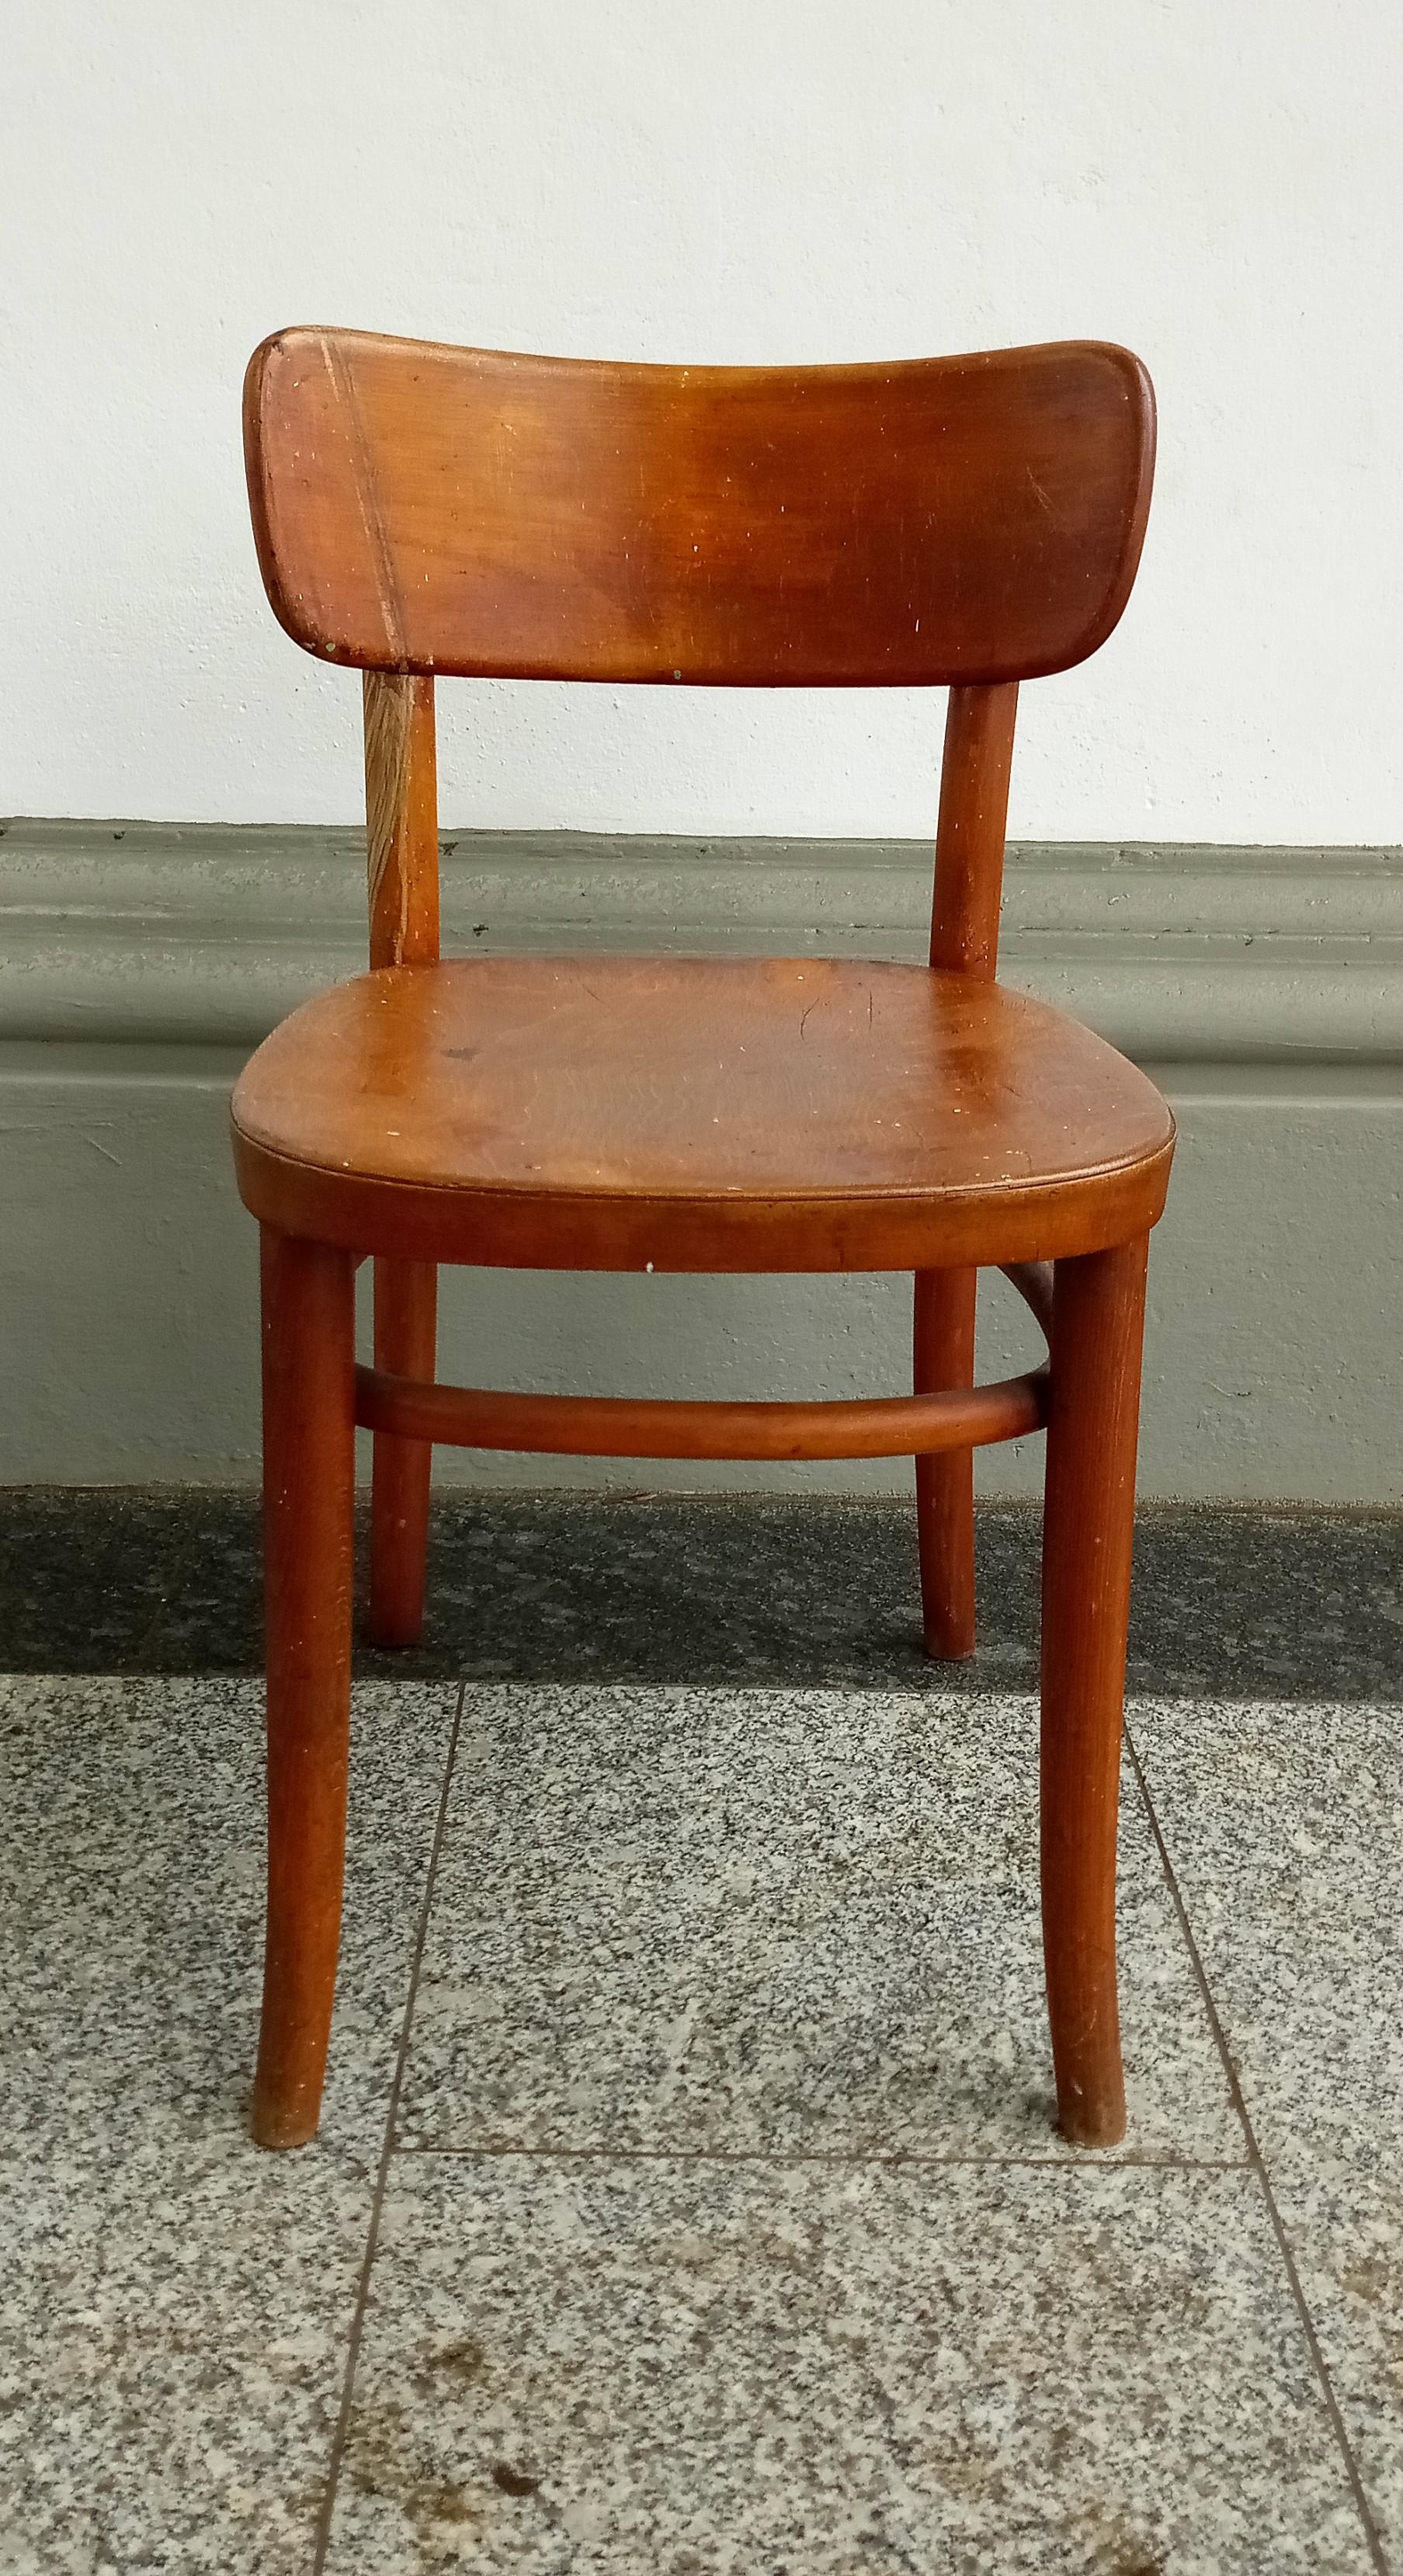 Bentwood Model 234 Chair by Magnus Stephensen for Fritz Hansen, 1920s in used condition with signs of use and age.